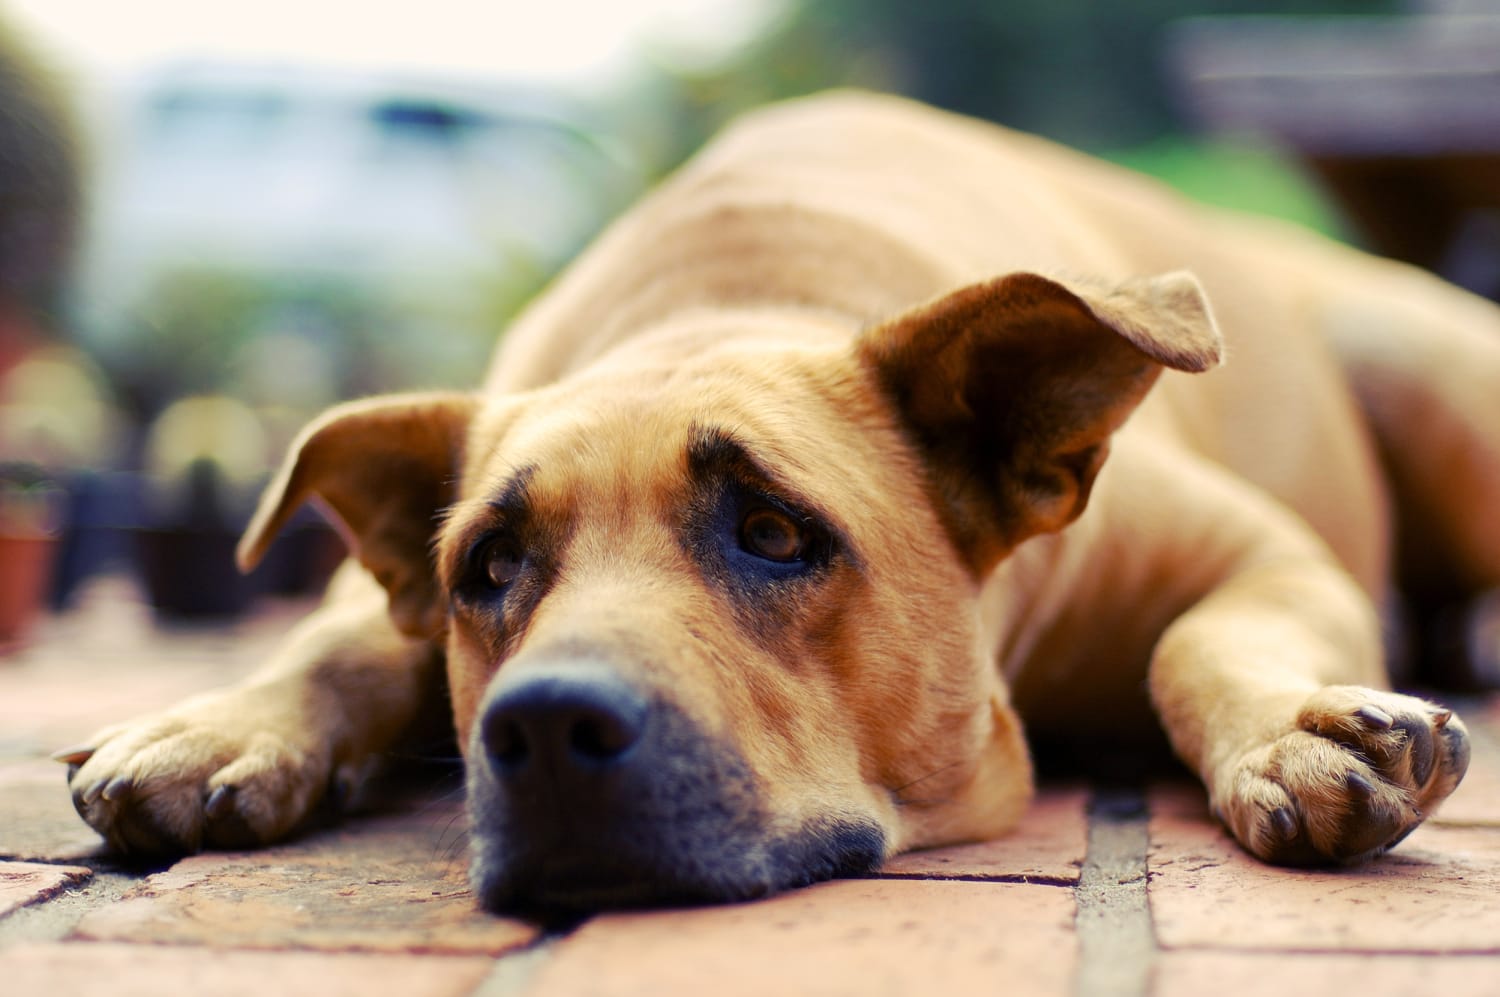 Can Domestic Violence Really Affect Pets?